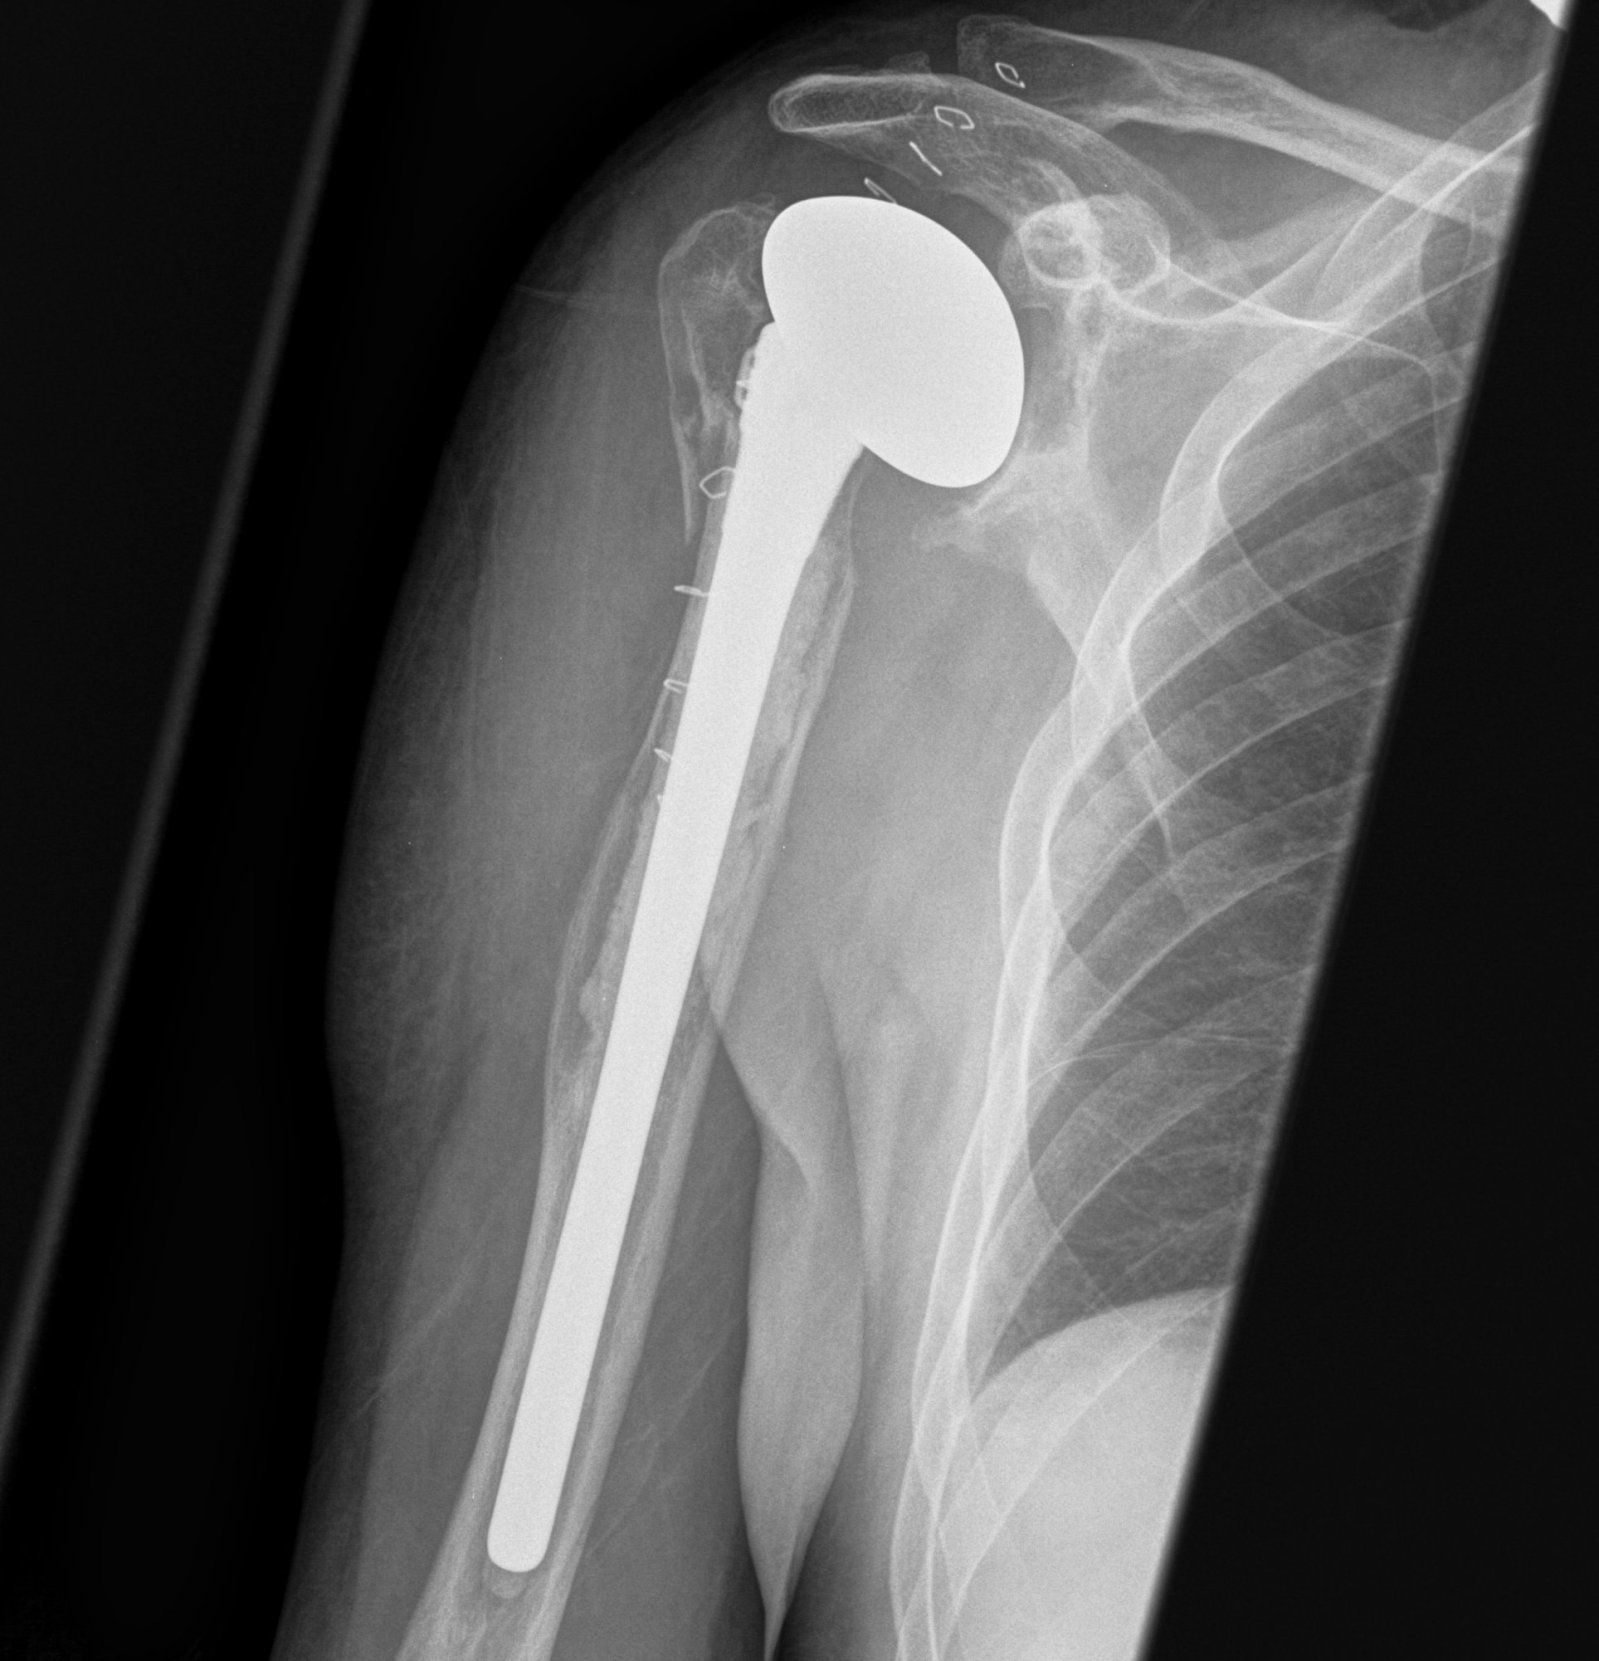 Revision TSR Long Stem Cemented Humeral Component